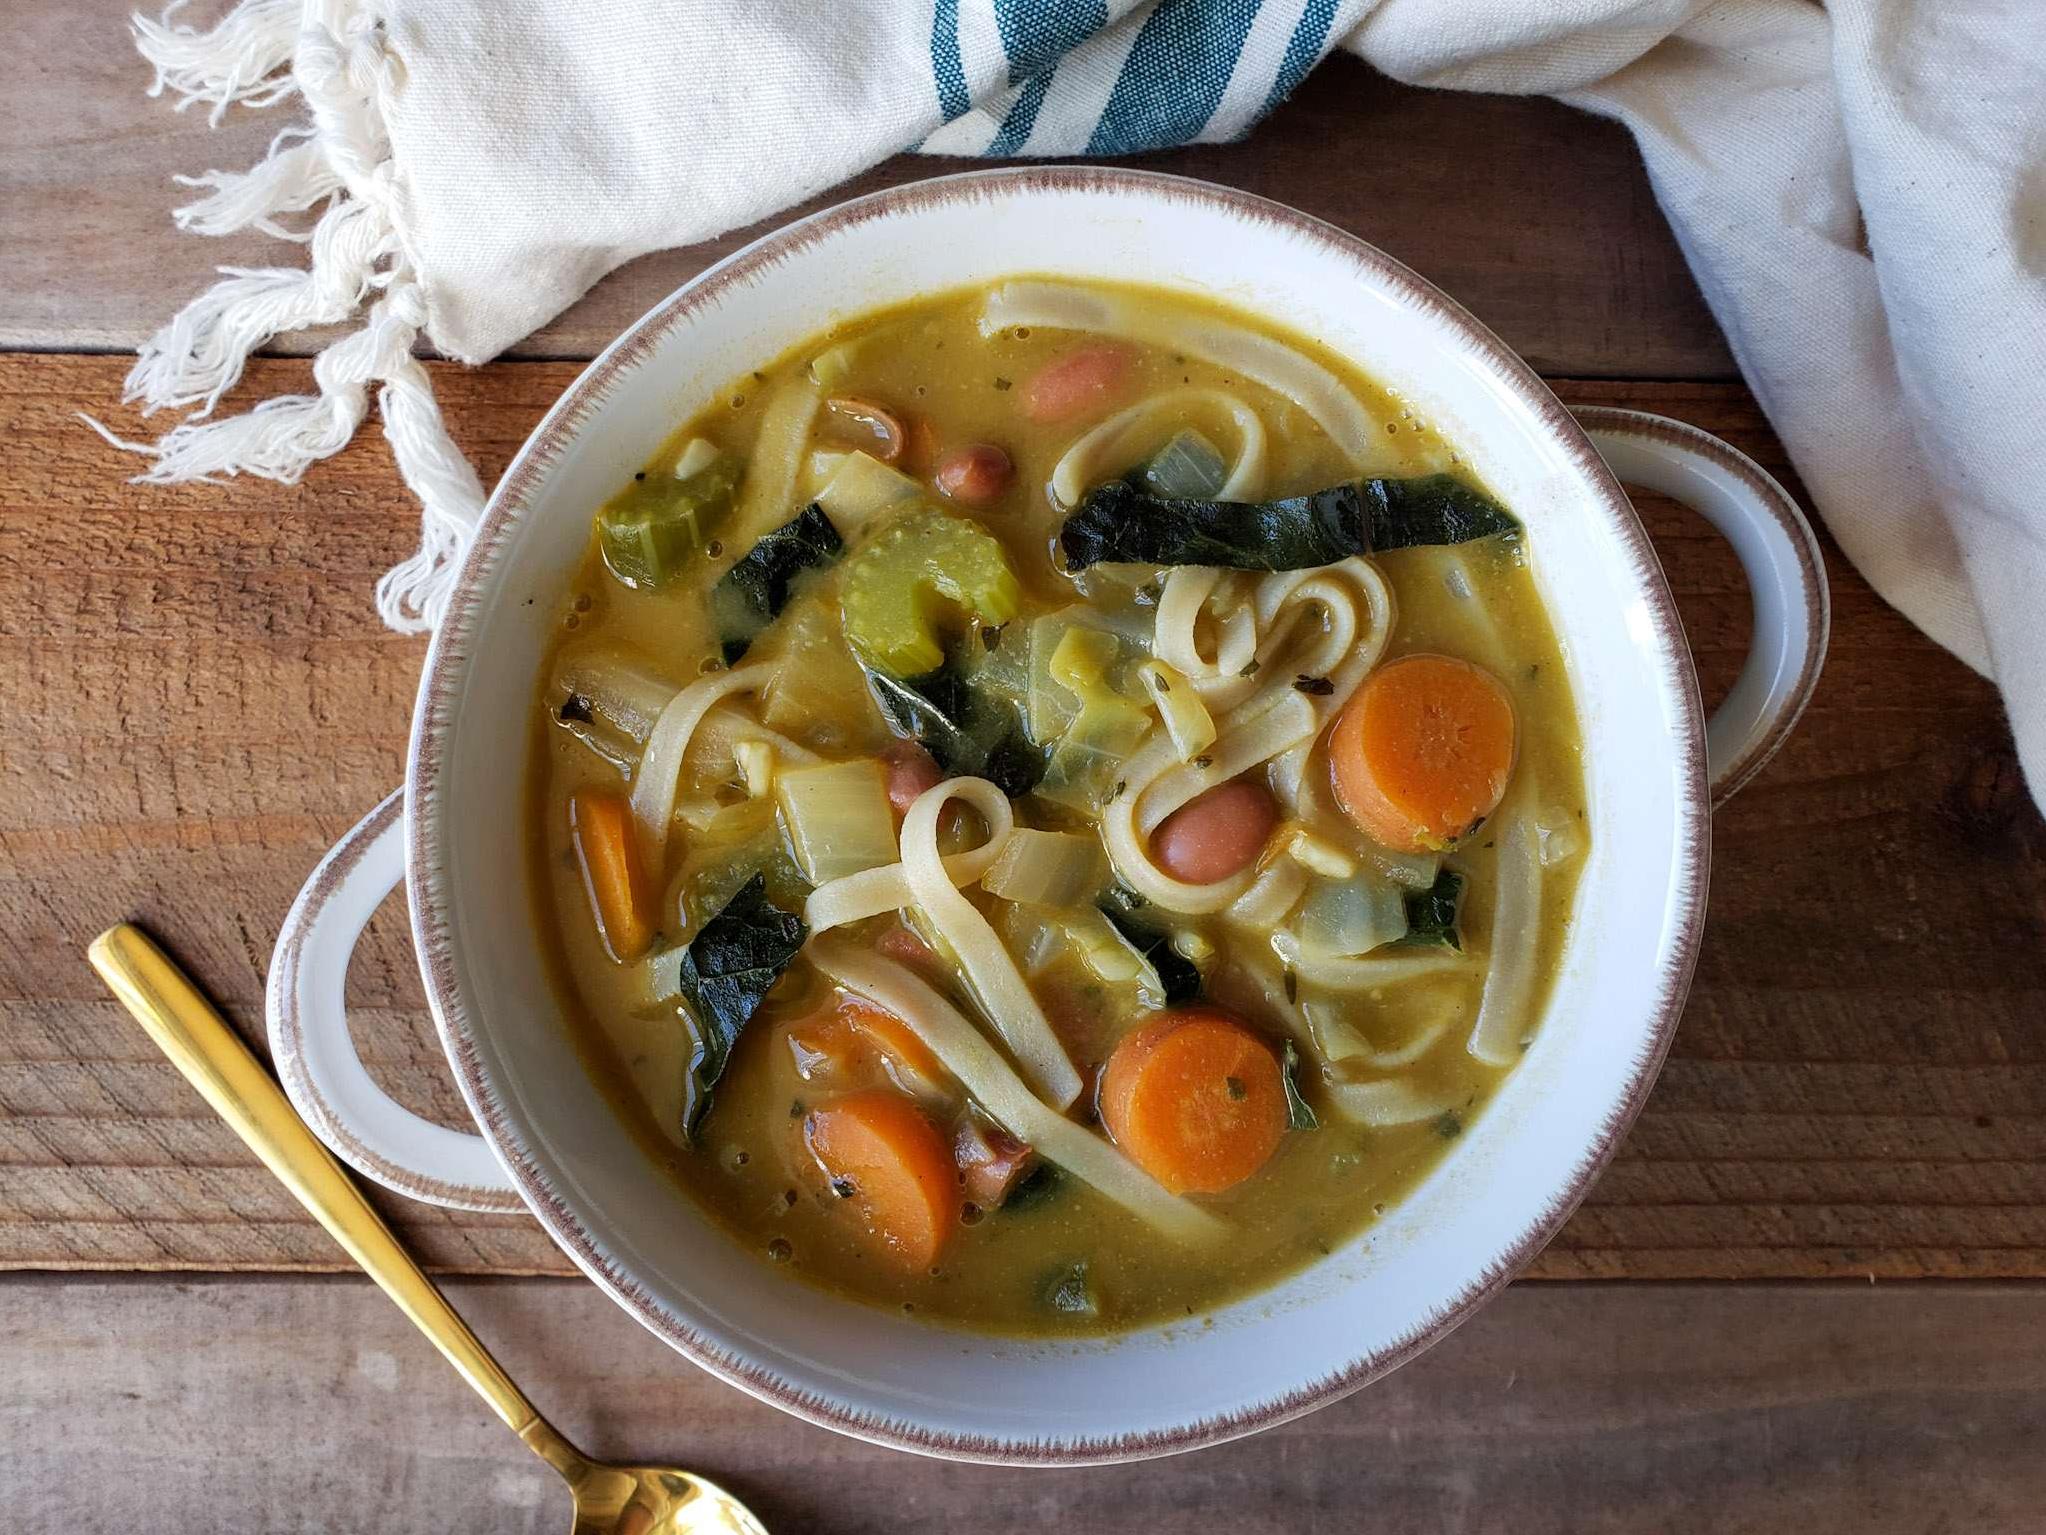  Comfort food at its finest! A hearty, plant-based no-chicken noodle soup.